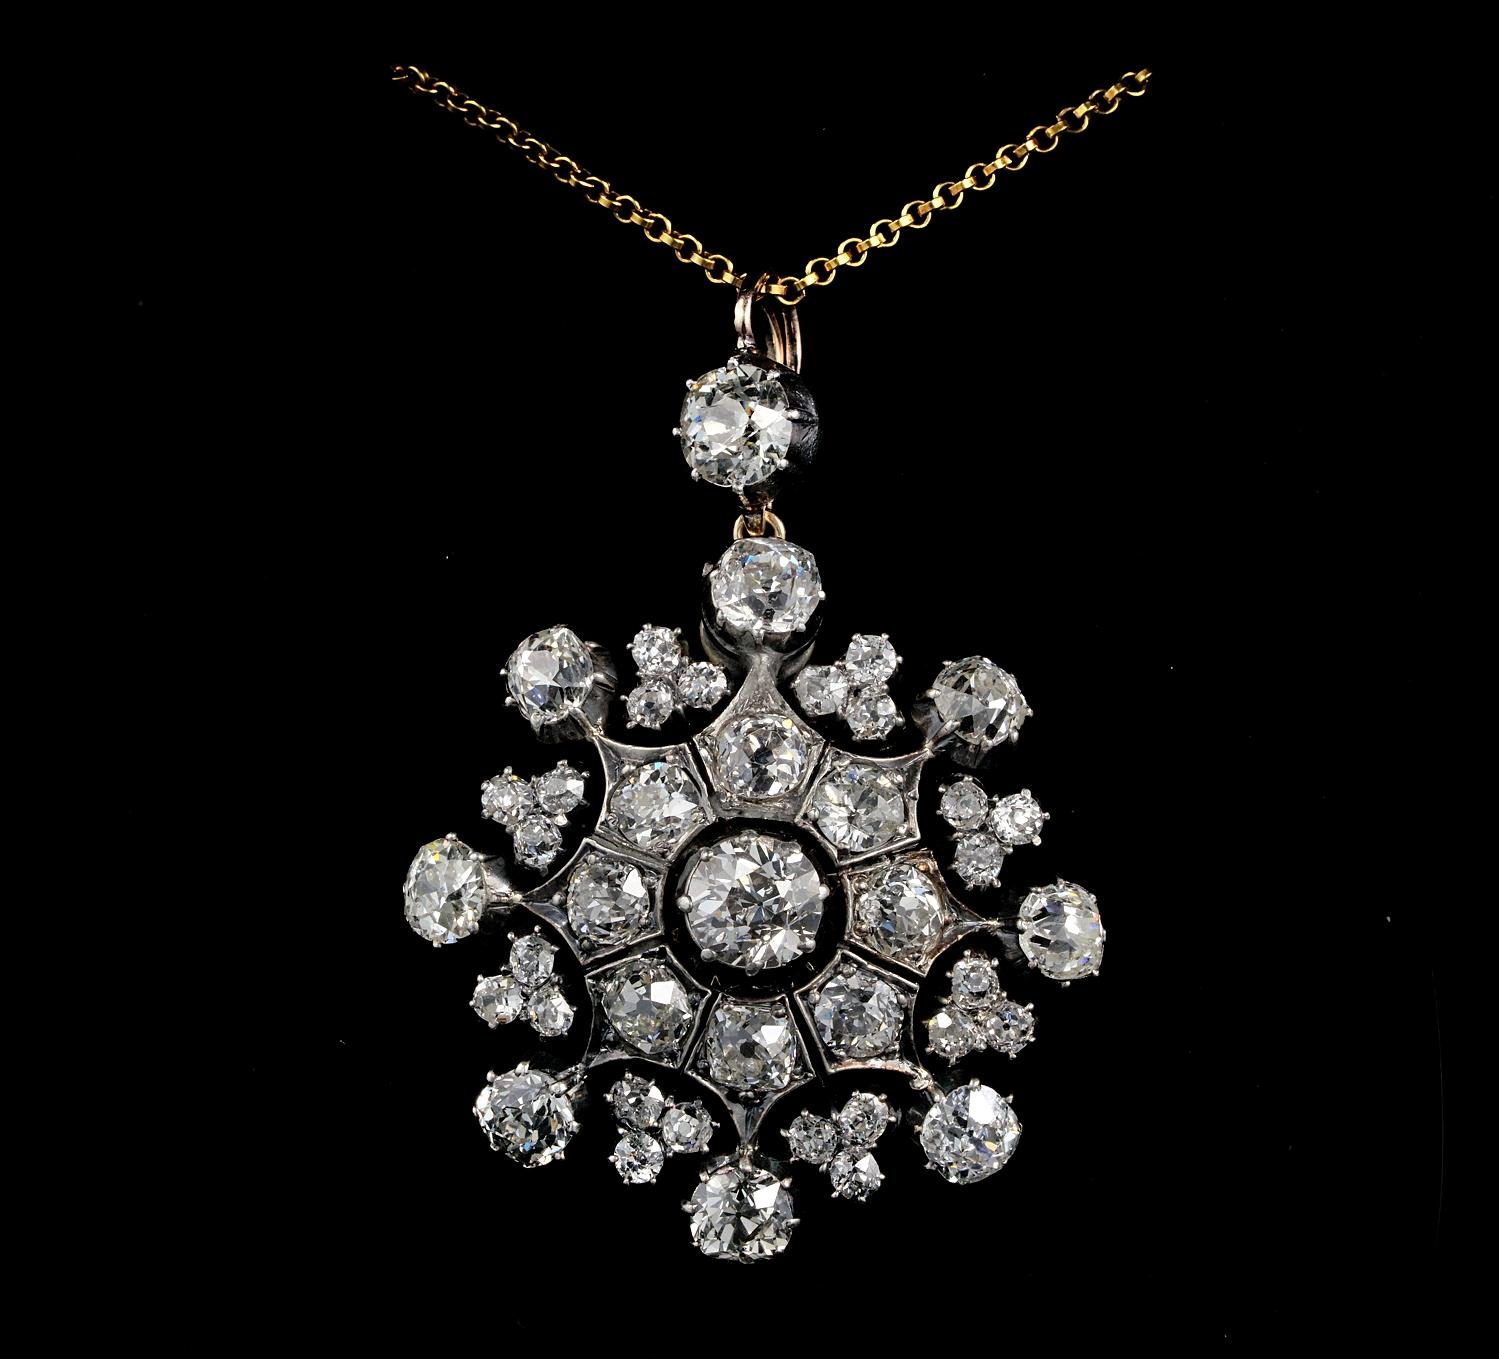 Heirloom
A rare, regal and extraordinary Victorian jewel, elegantly crafted in silver over rose gold, circa 1860
Festive, important, dazzling snowflake for an impressive impact whether worn as pendant or as pin brooch
This ravishing pendant and